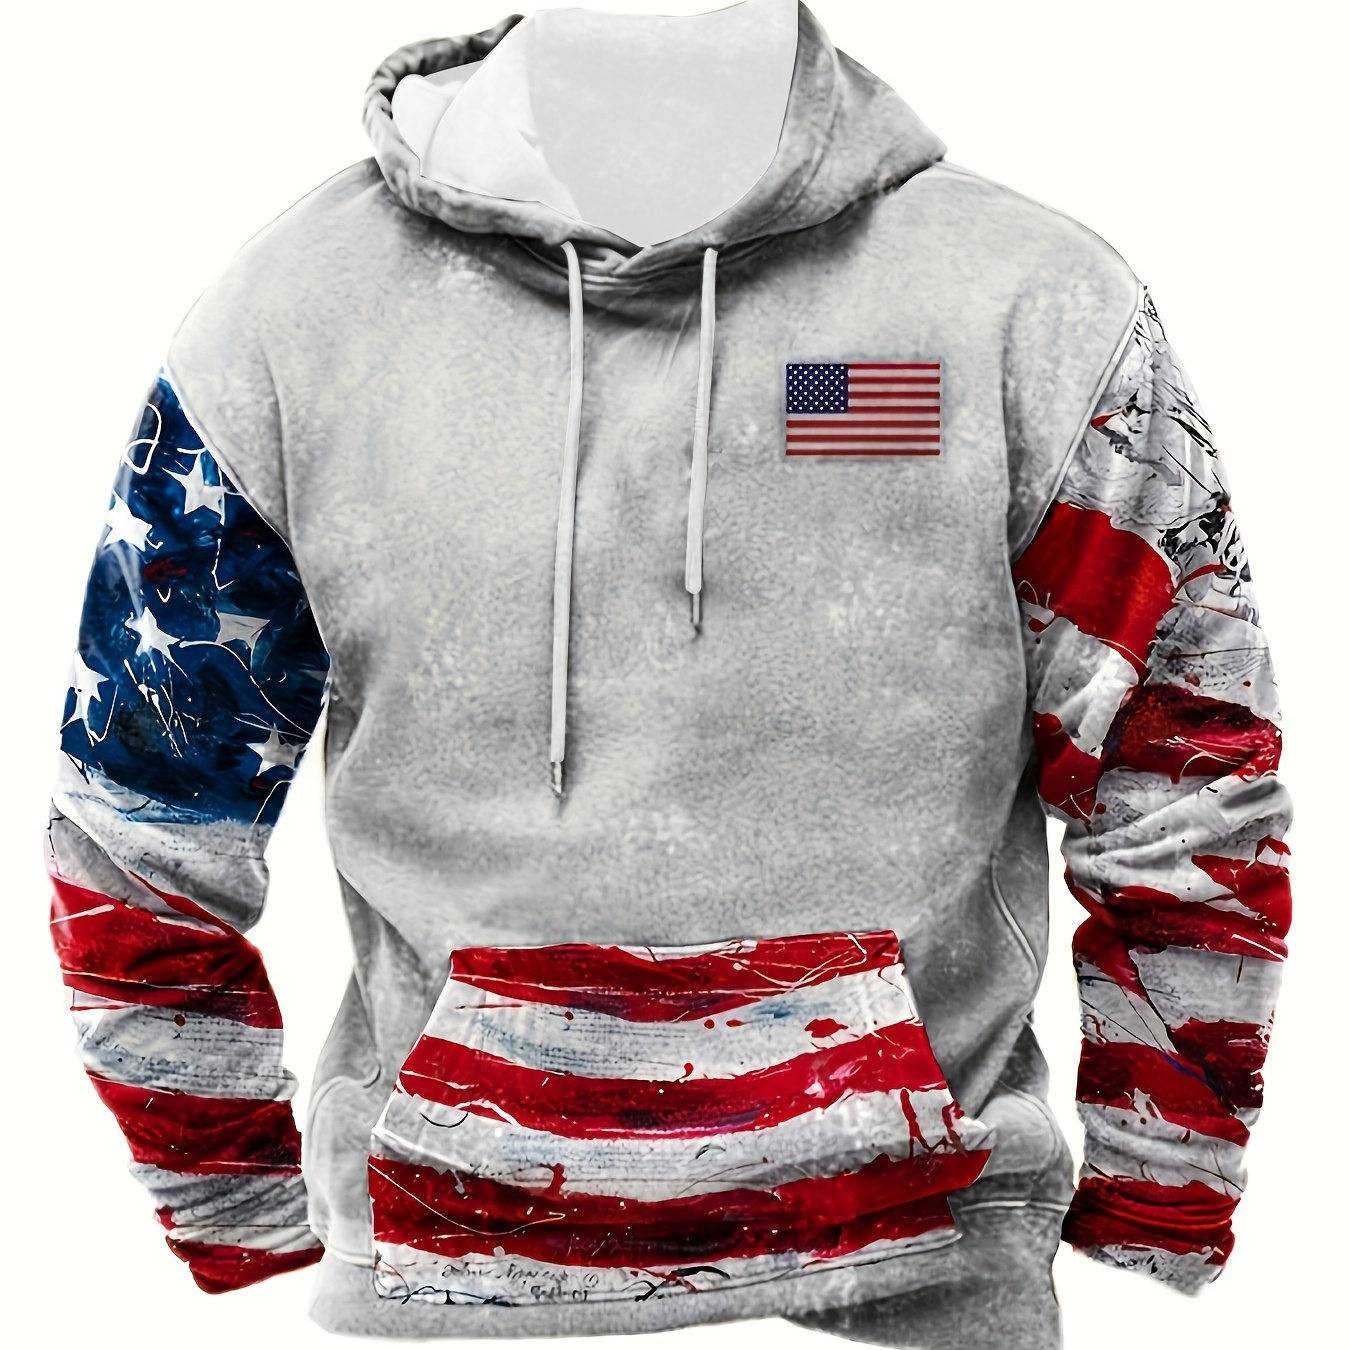 

Plus Size Men's Stylish Loose Flag Graphic Print Hoodie With Pockets, Casual Breathable Long Sleeve Hooded Sweatshirt For Outdoor Activities, Men's Clothing